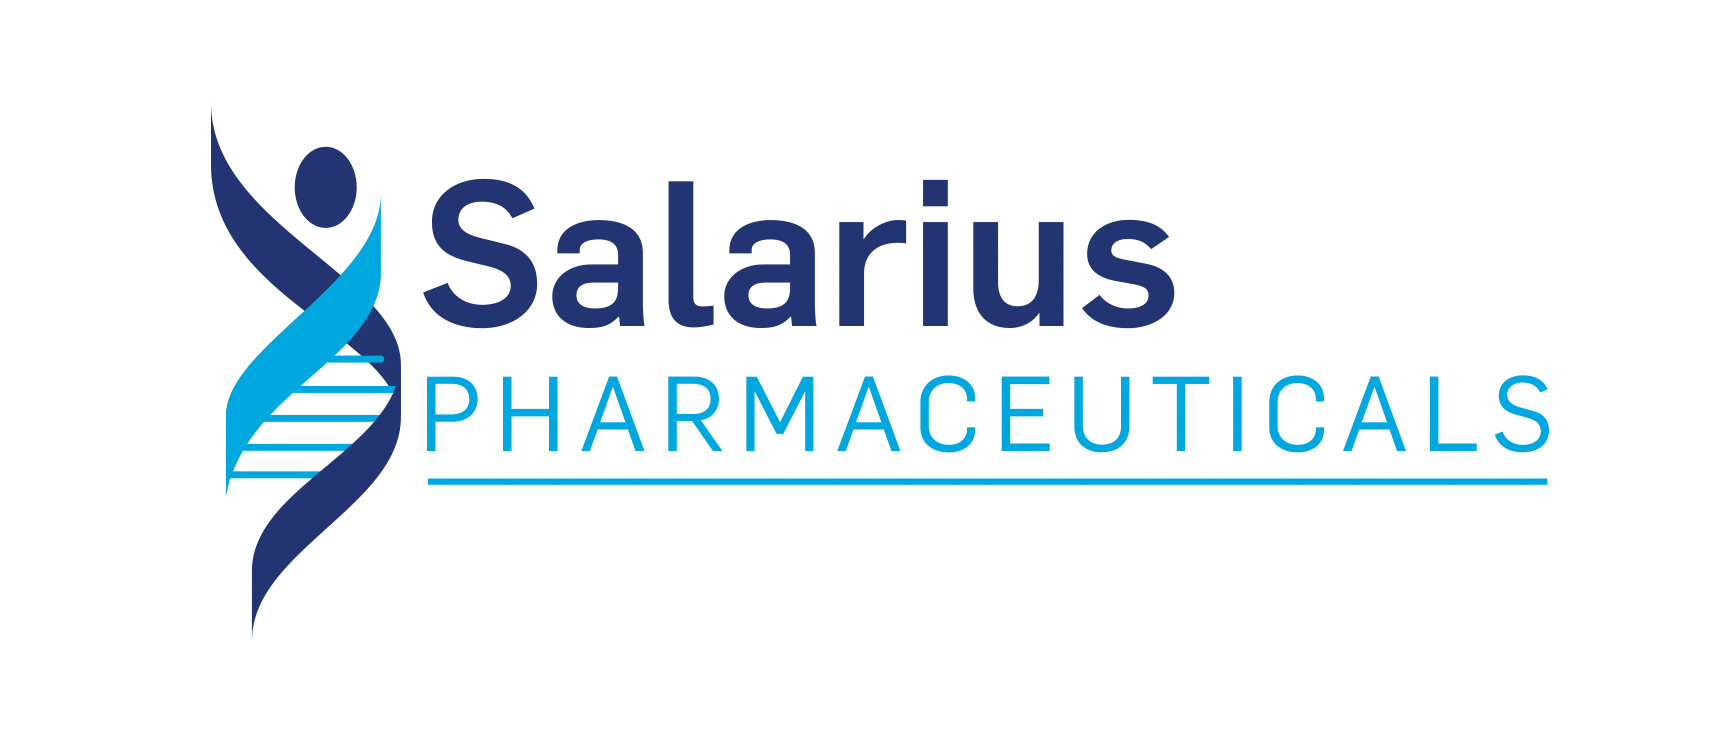 Salarius Pharmaceuticals Adds Two Mayo Clinic Sites to its Ongoing Phase 1/2 Trial of Seclidemstat as a Treatment for Ewing's Sarcoma and FET-Rearranged Sarcomas